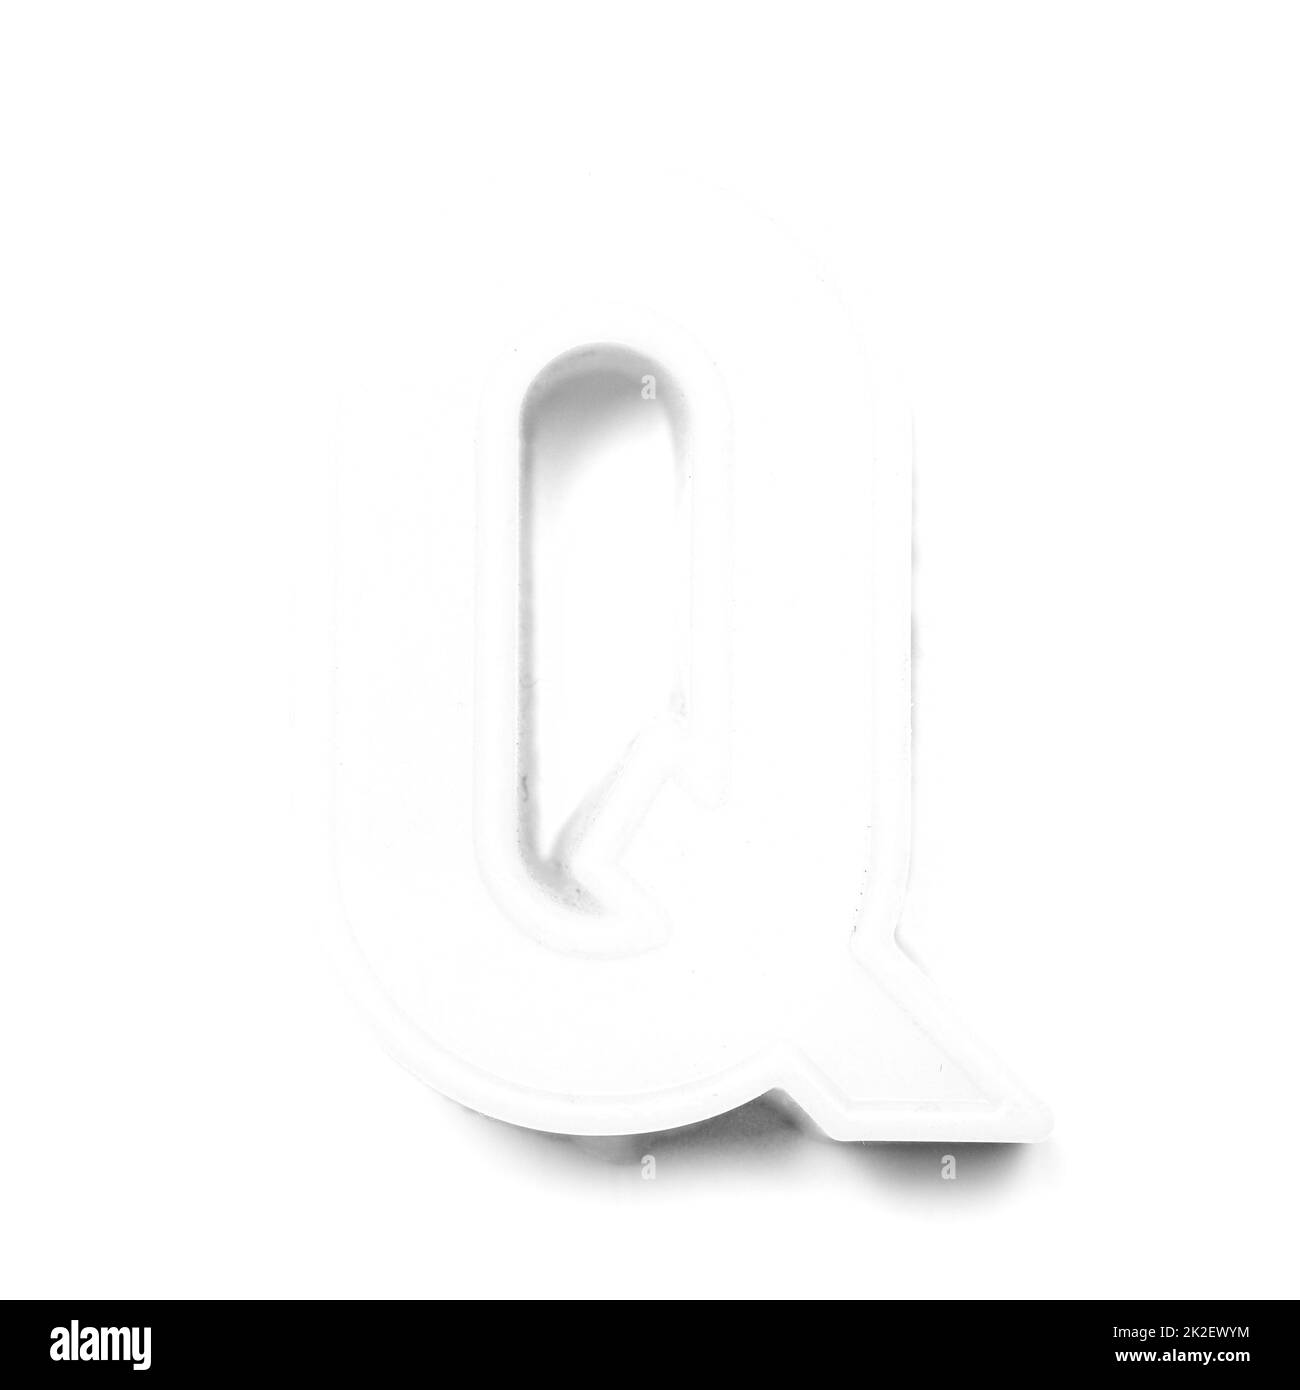 Magnetic uppercase letter Q in black and white Stock Photo